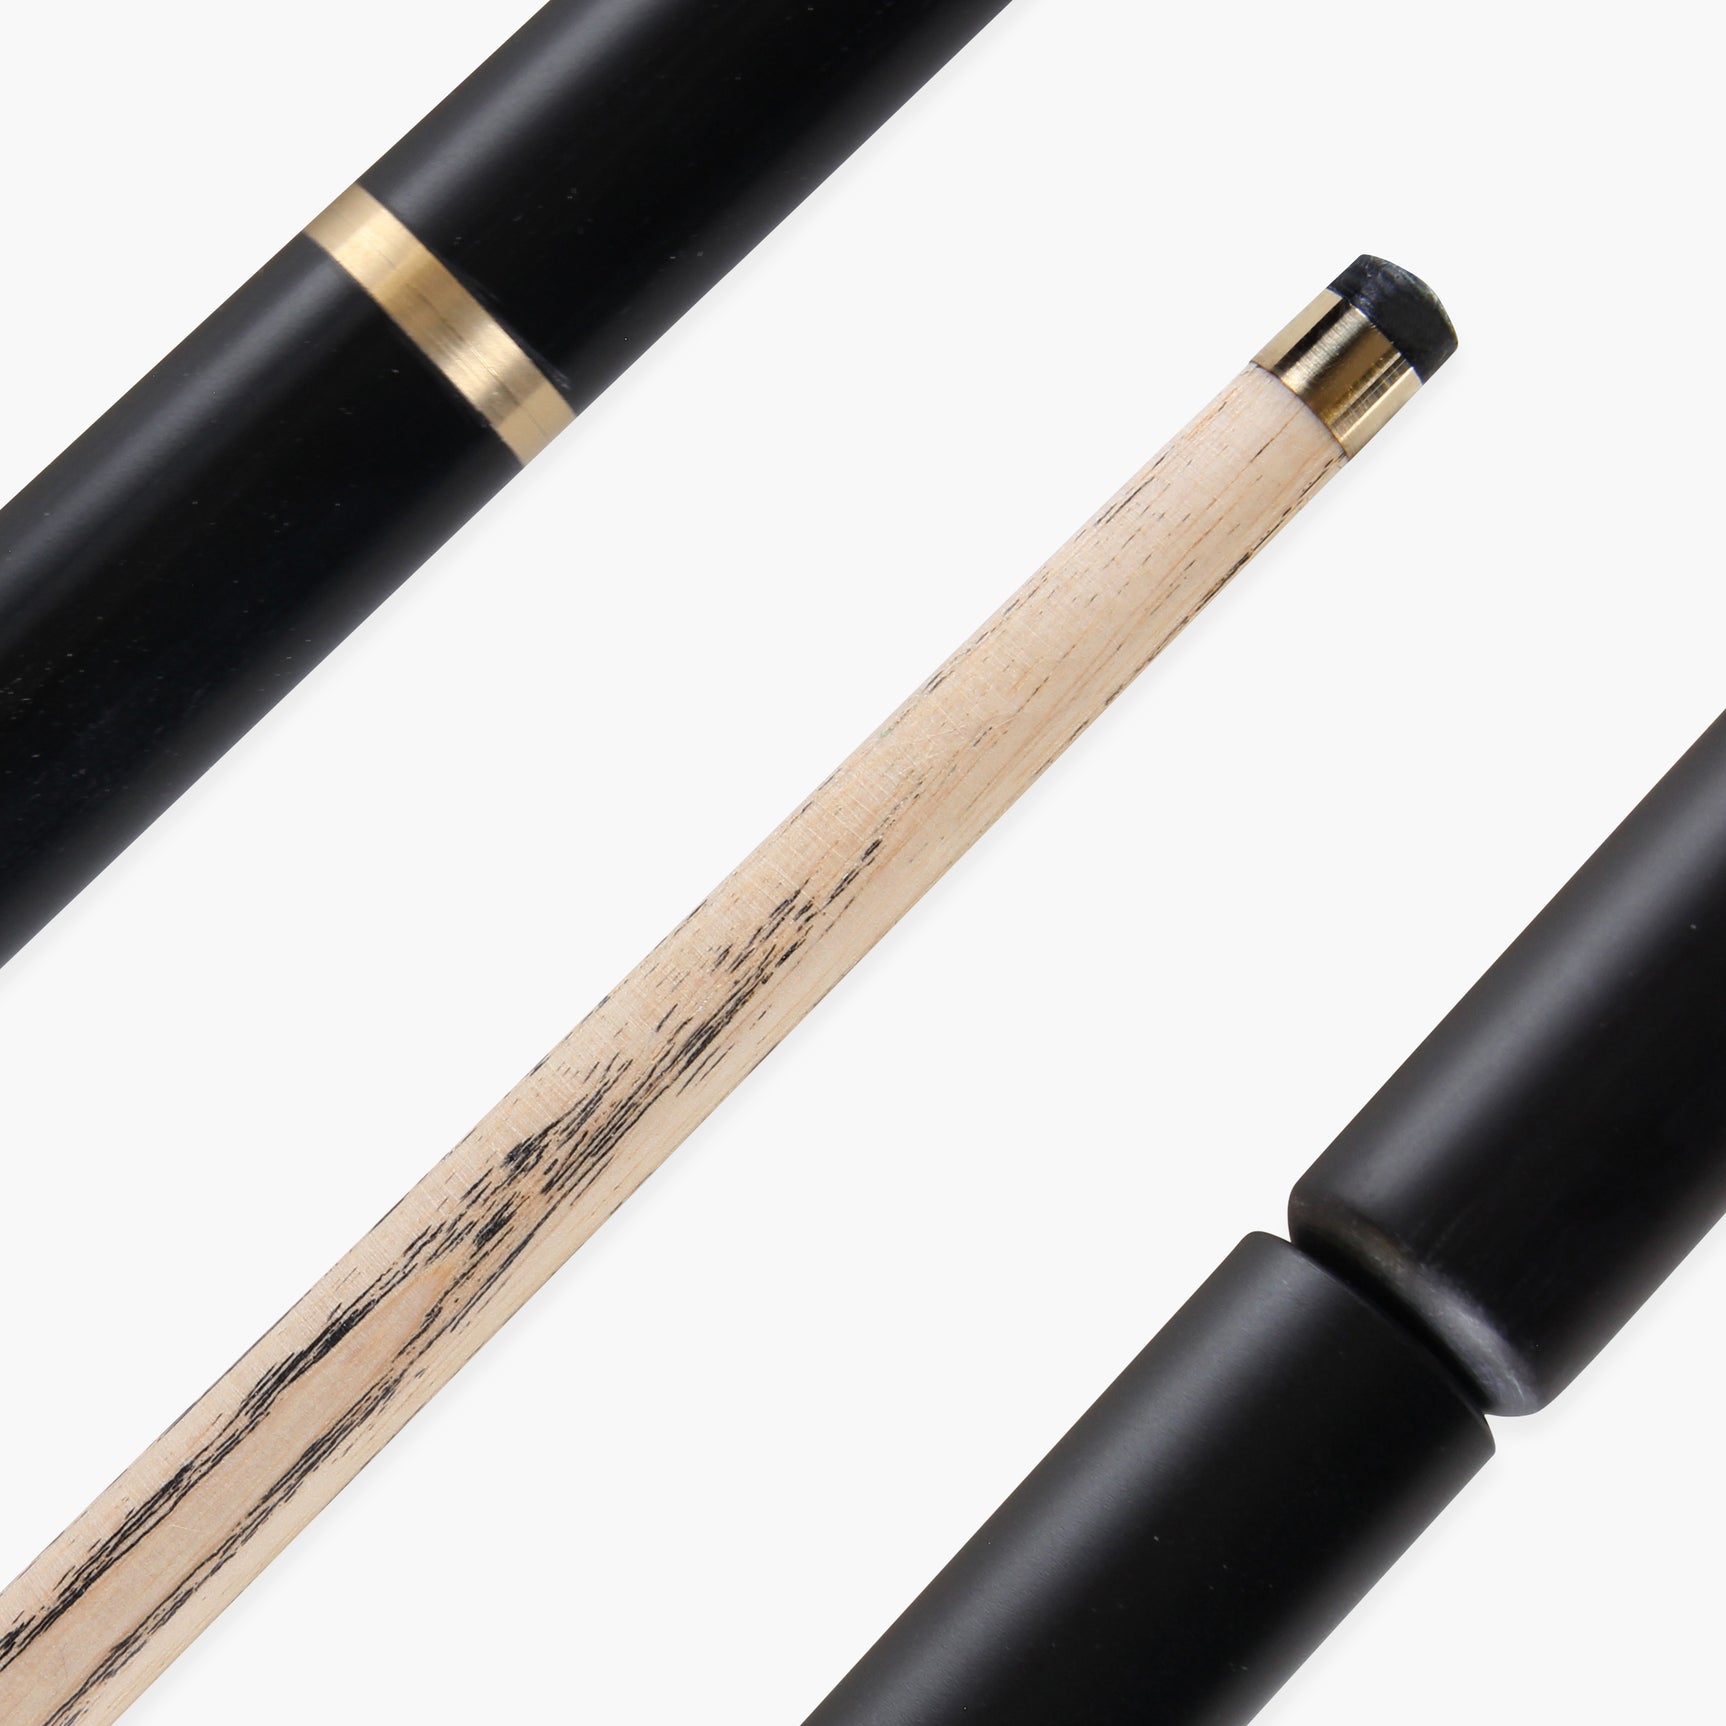 BAIZE MASTER Limited Edition Gold Series 58 Inch ¾ Jointed Professional Snooker Pool Cue 9.5mm with hand-fitted Medium Pro Layered Tip – Polished and finished locally in the UK!